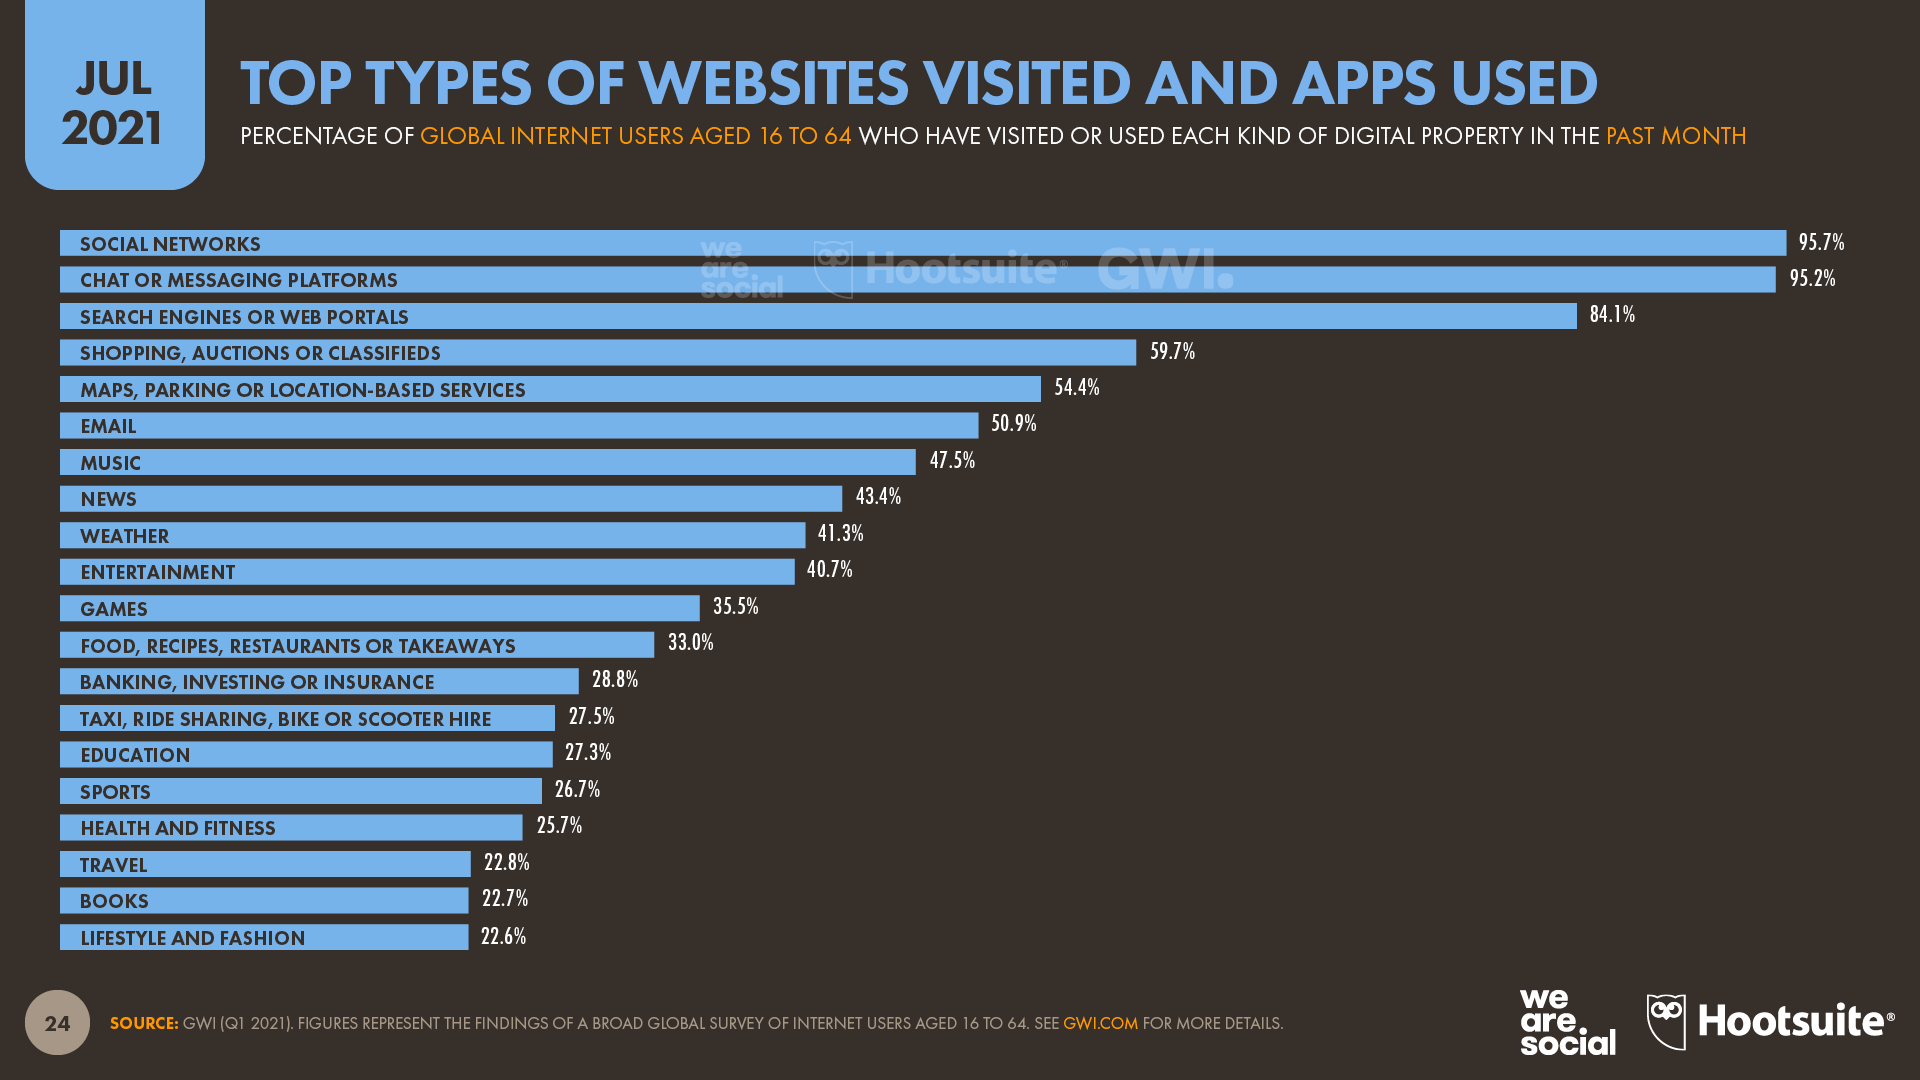 chart showing top types of websites visited and apps used as of July 2021